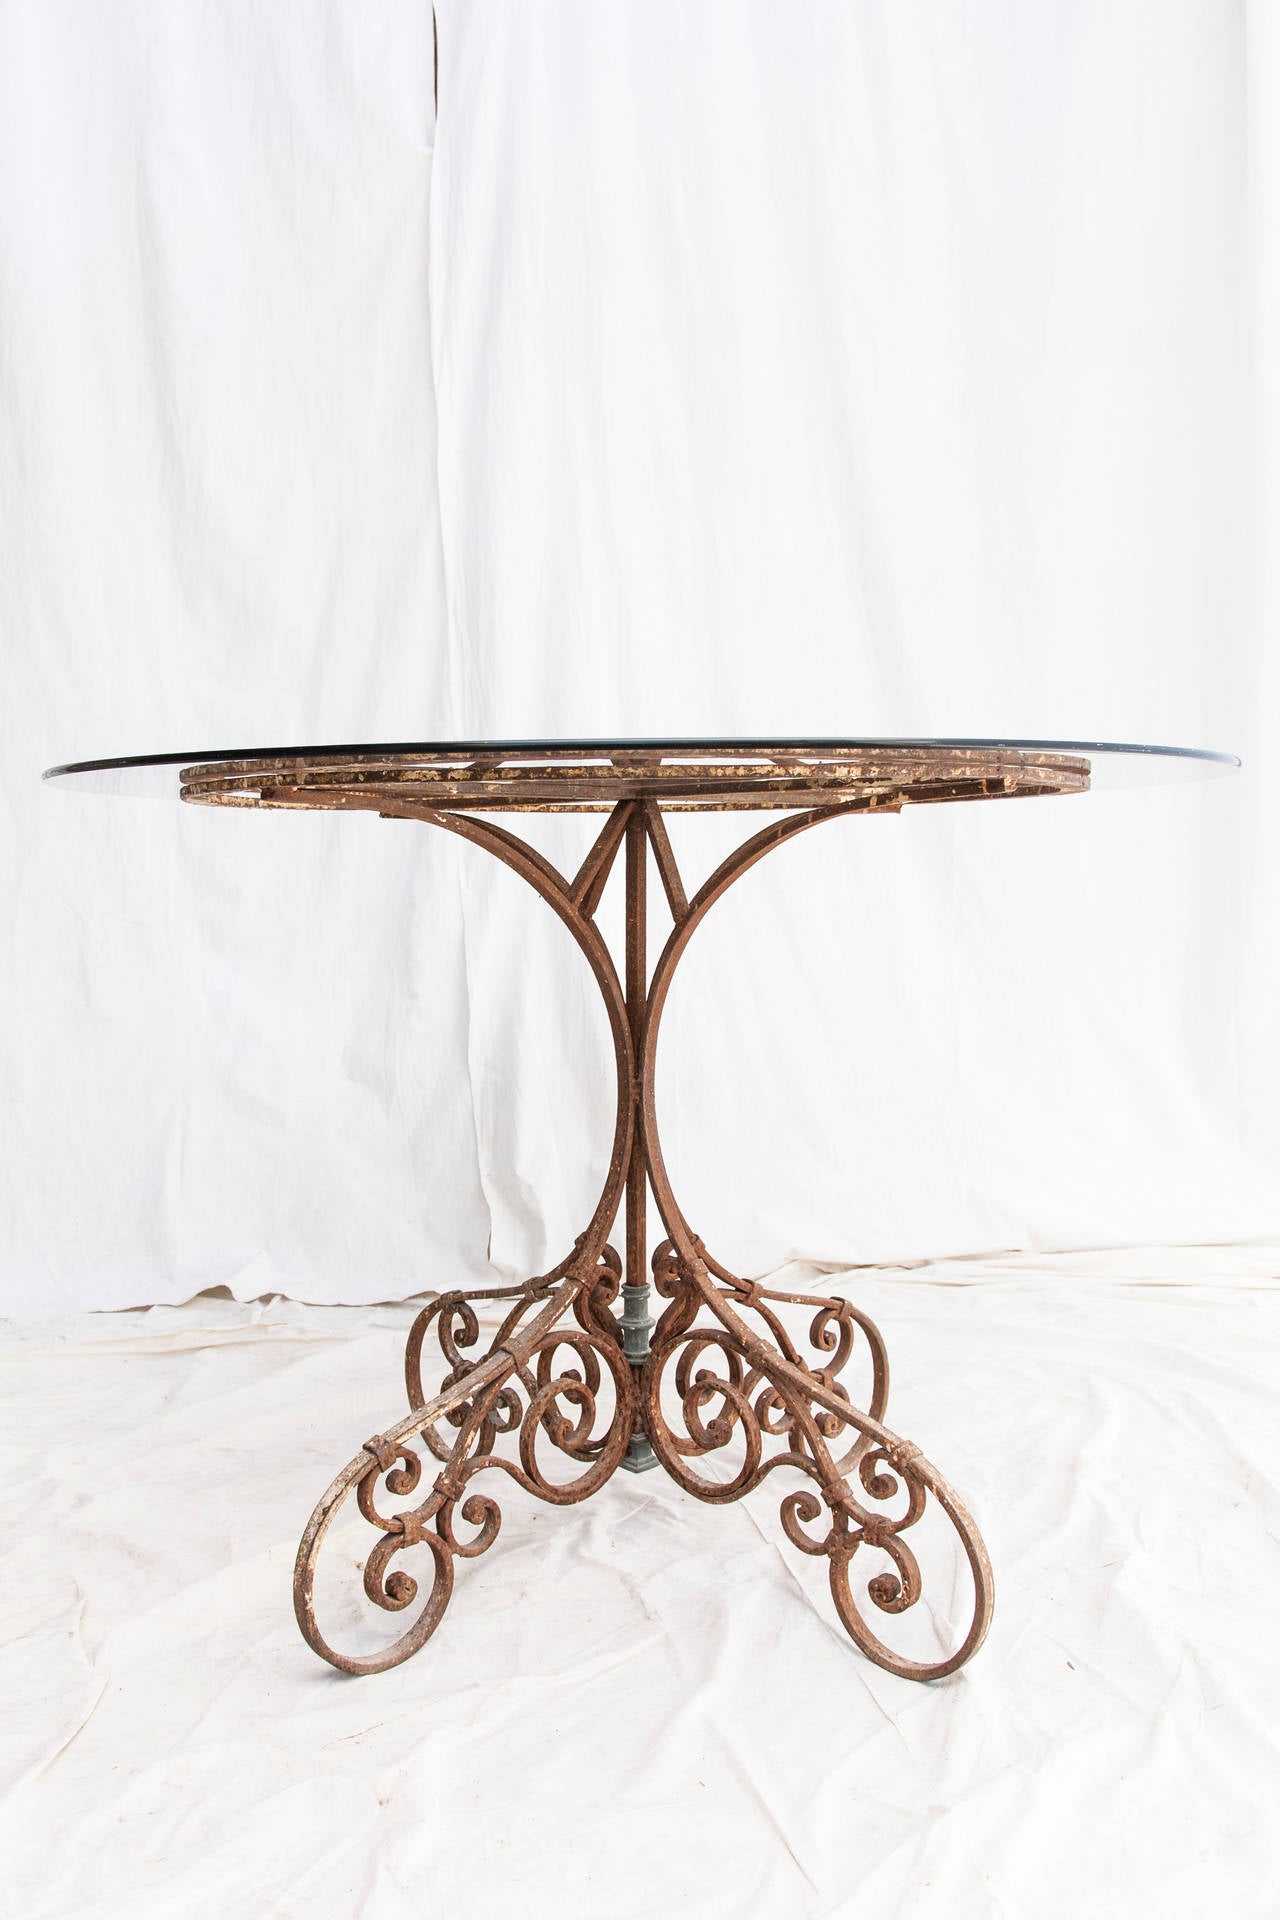 19th Century French Hand-Forged, Aged Iron Table with Smoked Glass 7